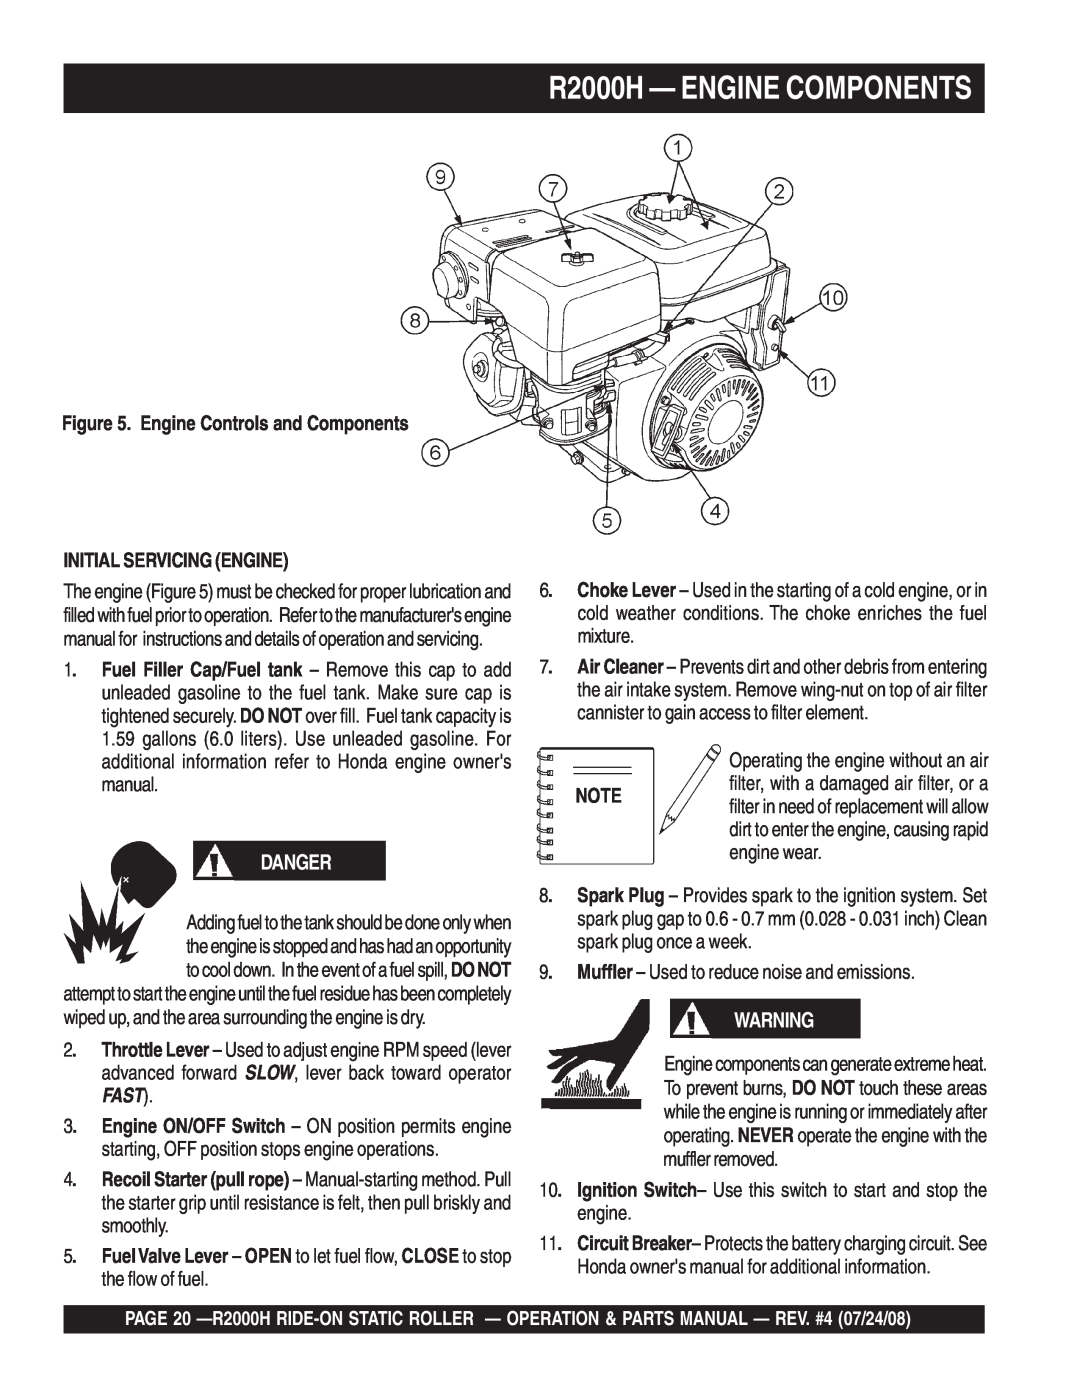 Multiquip manual R2000H - ENGINE COMPONENTS, Danger, Engine Controls and Components, Initial Servicing Engine 